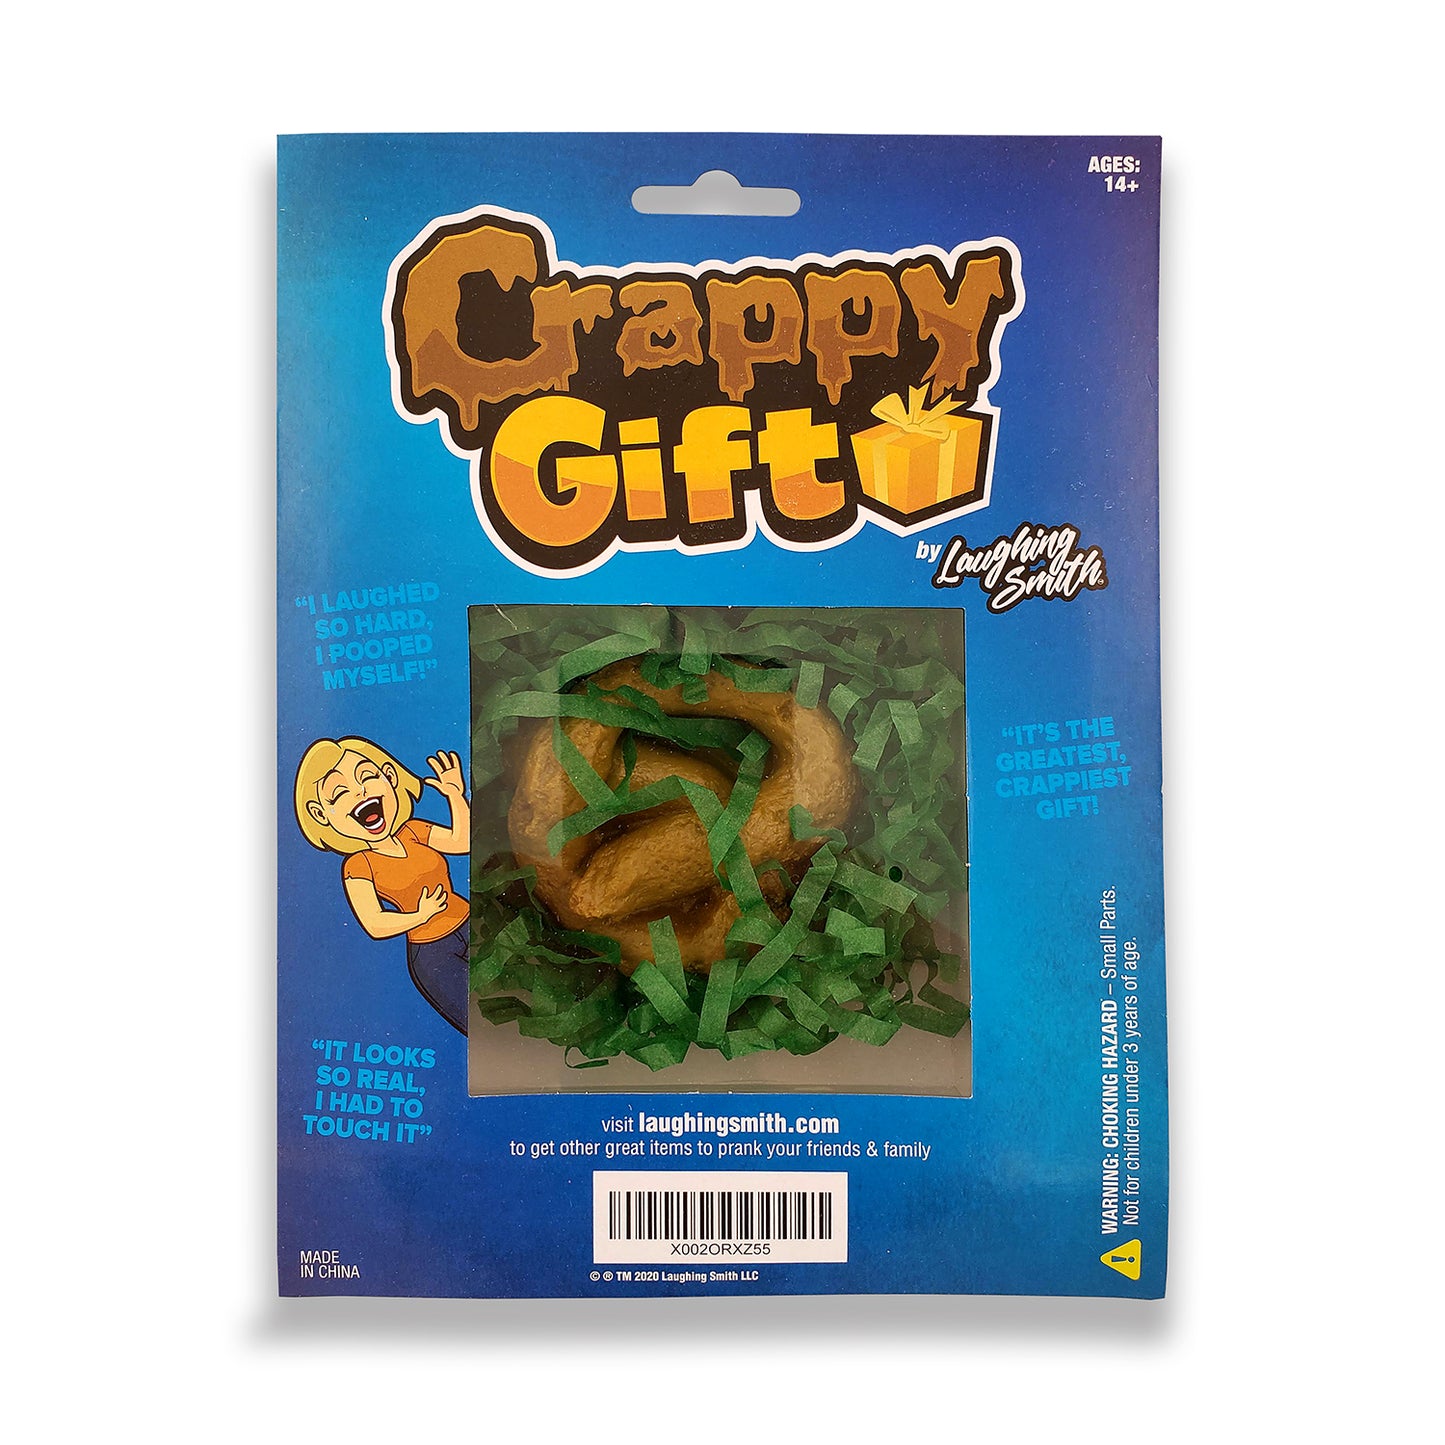 Crappy Gift - Fake Poo Toy Prank in a Gift Box - Fun Gag Poop Gift for Kids and Adults